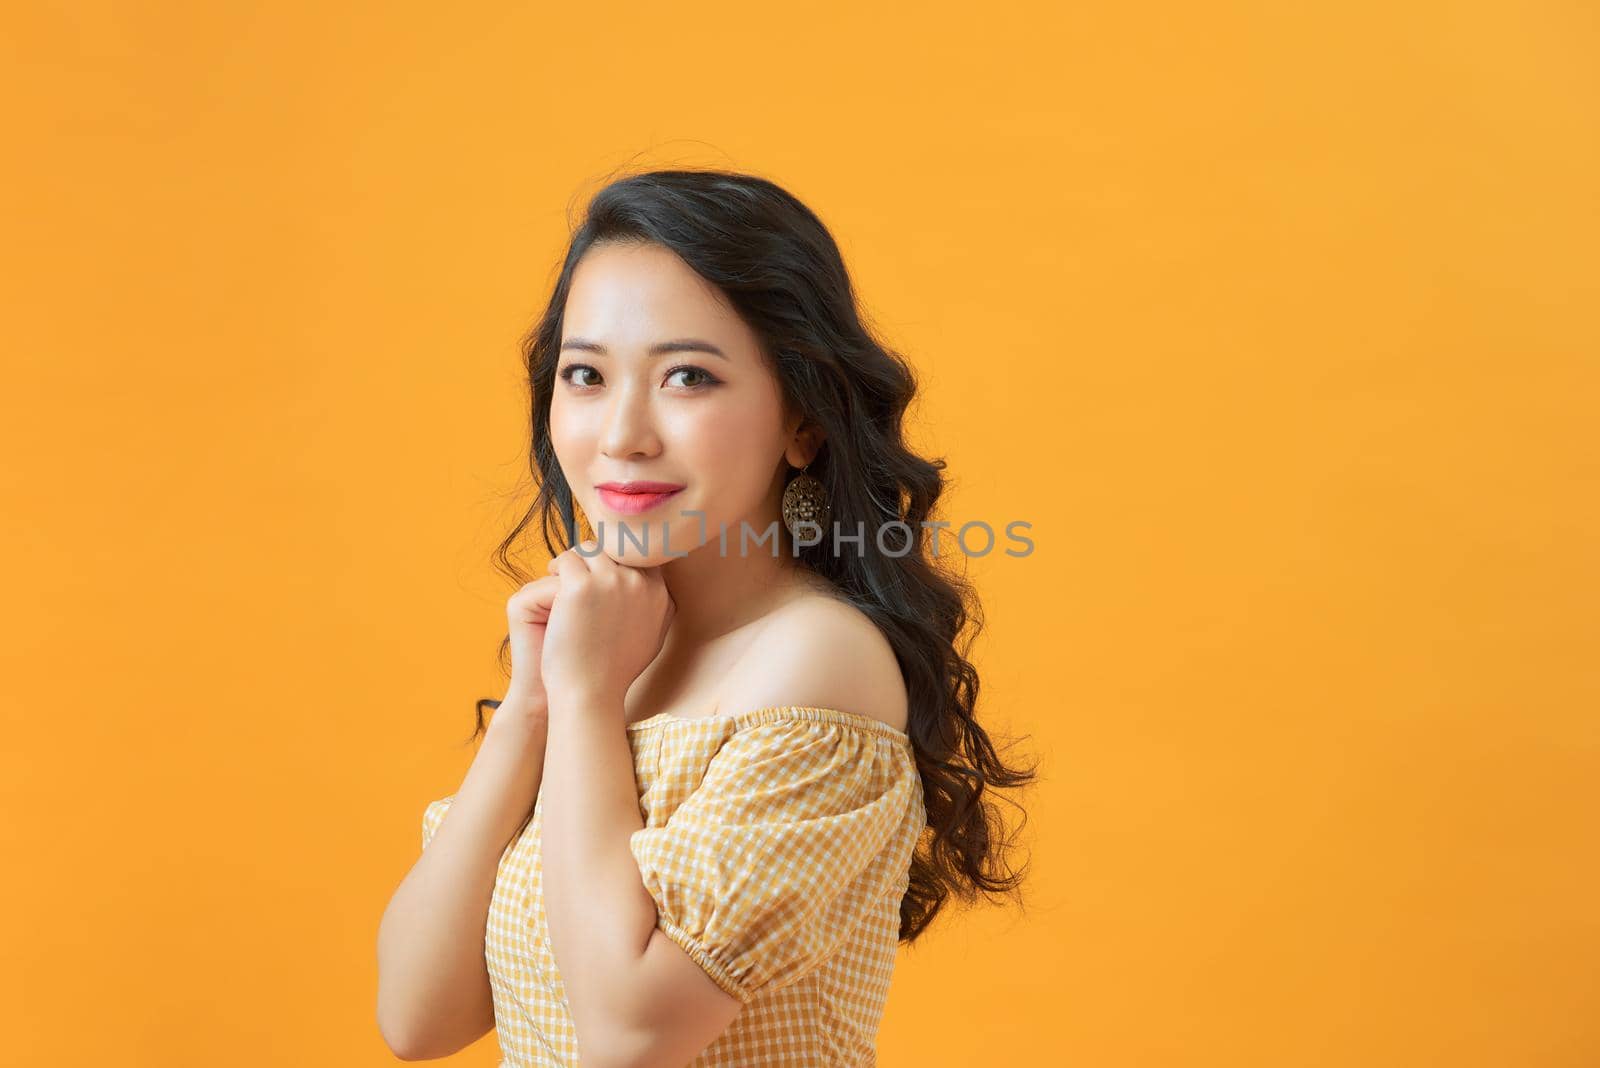 Close up photo of choosing girl making up her mind about something while isolated with yellow background